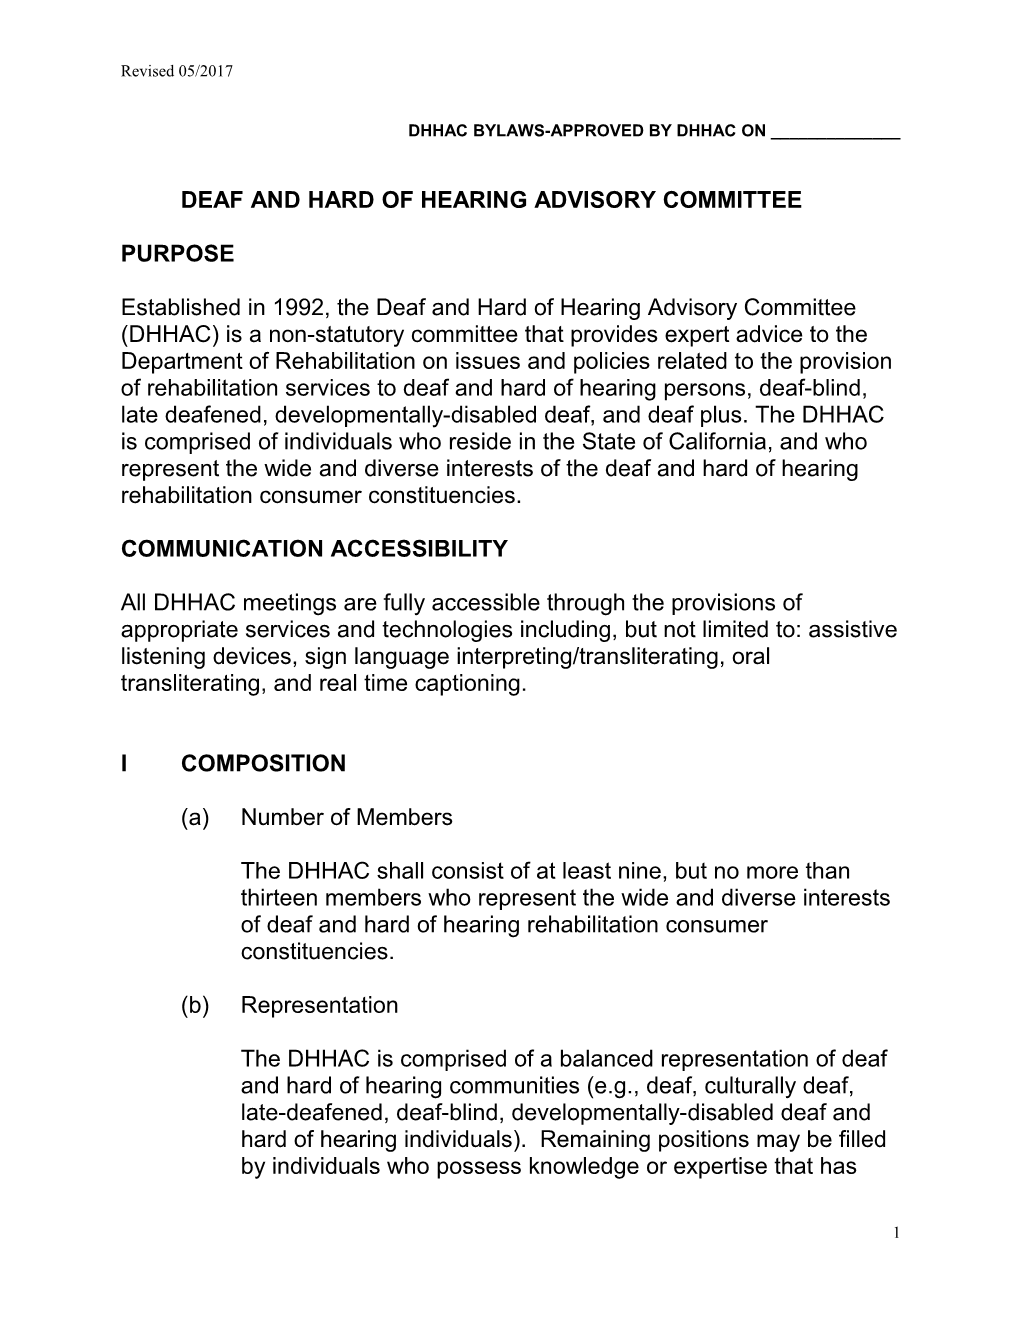 Dhhac Bylaws-Approved by Dhhac on 4/30/99